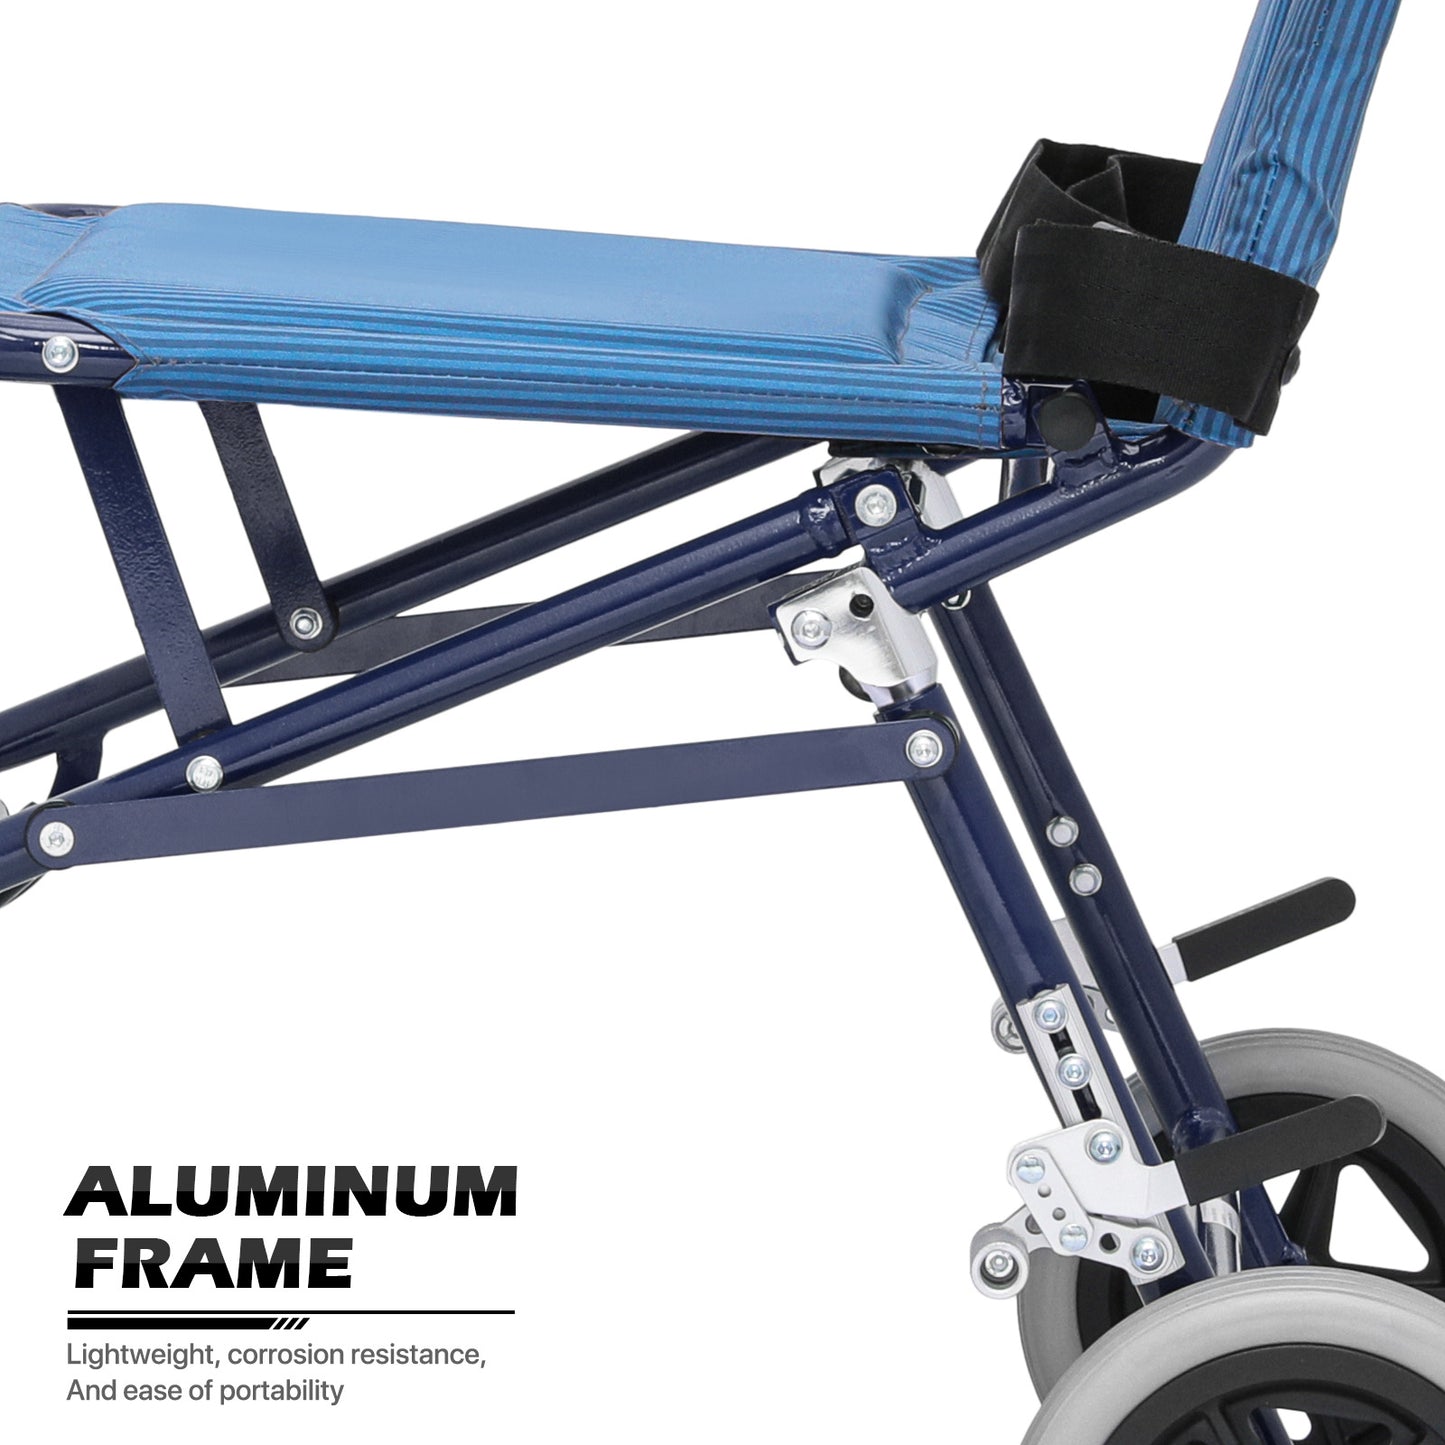 Transport Wheelchair - Blue - Can Be Carry-on Plane